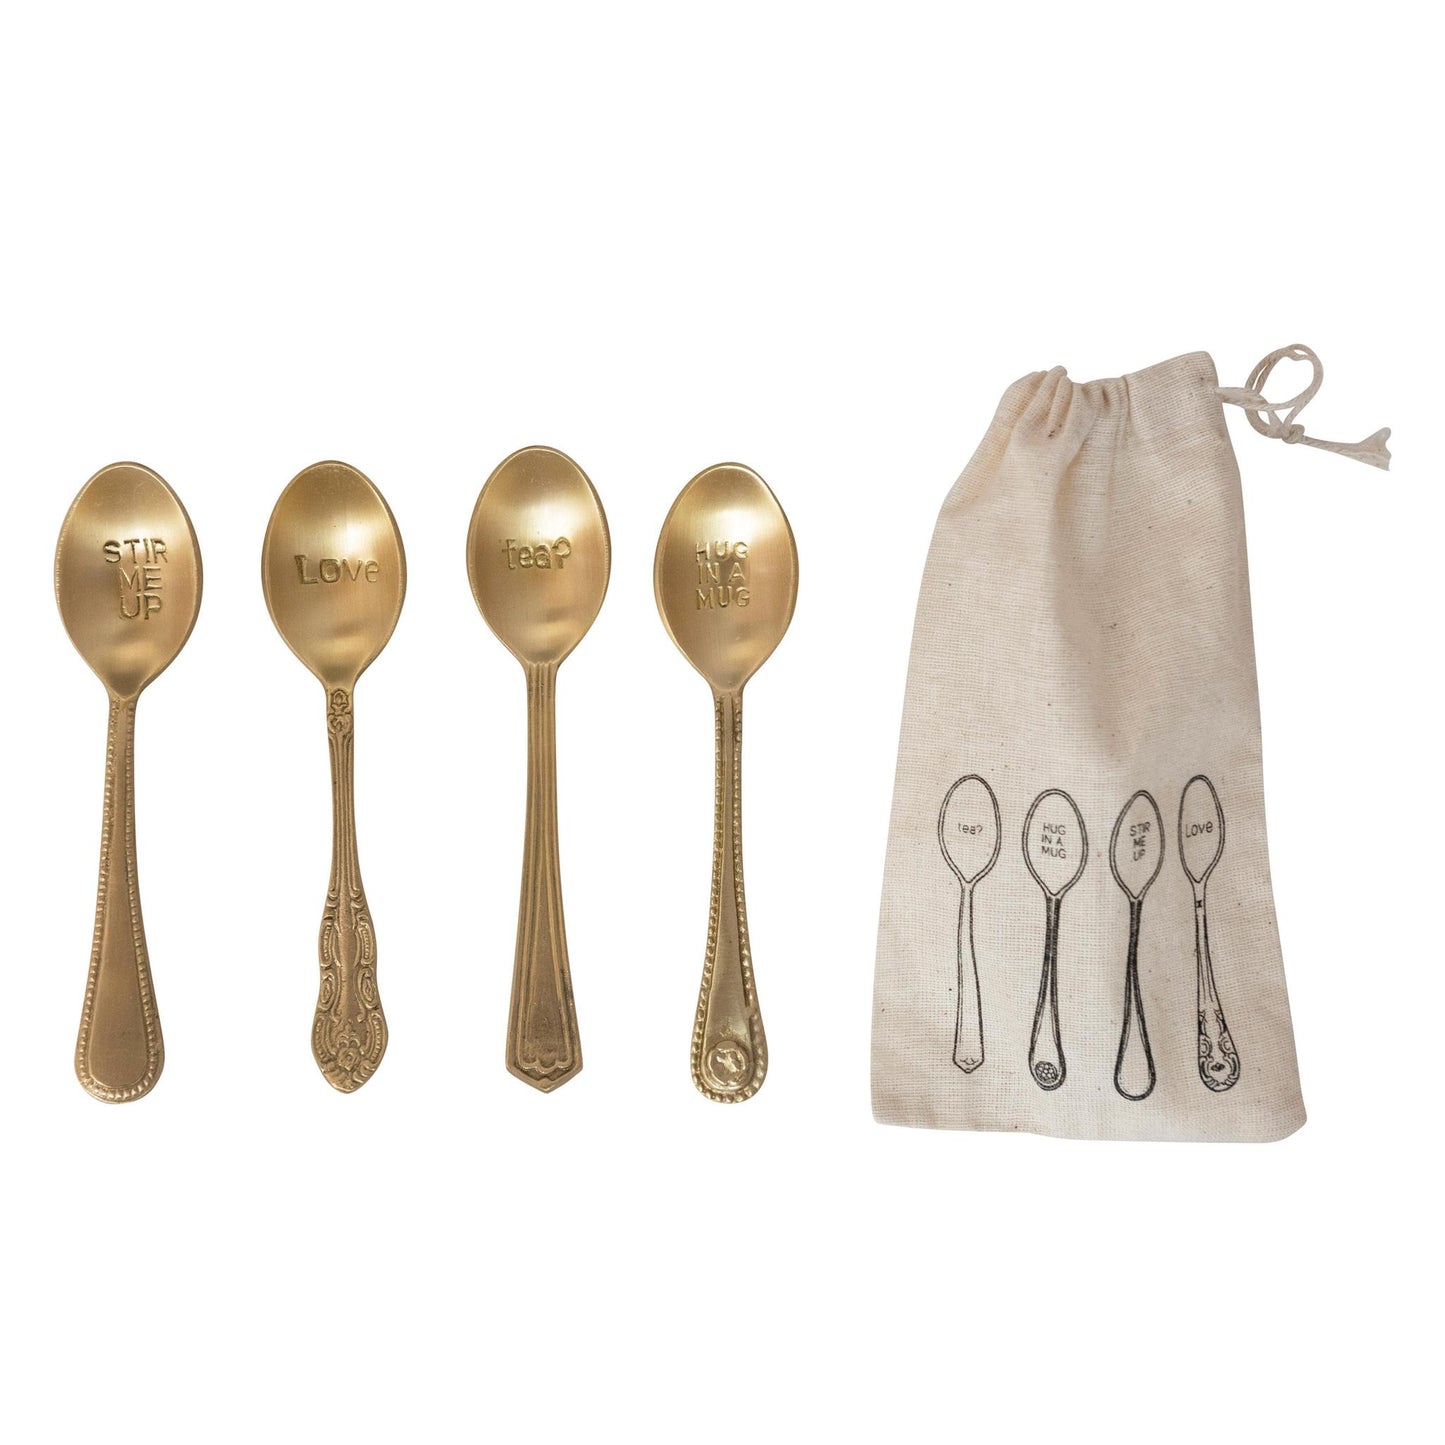 Brass Spoon Set with Engraved Sayings